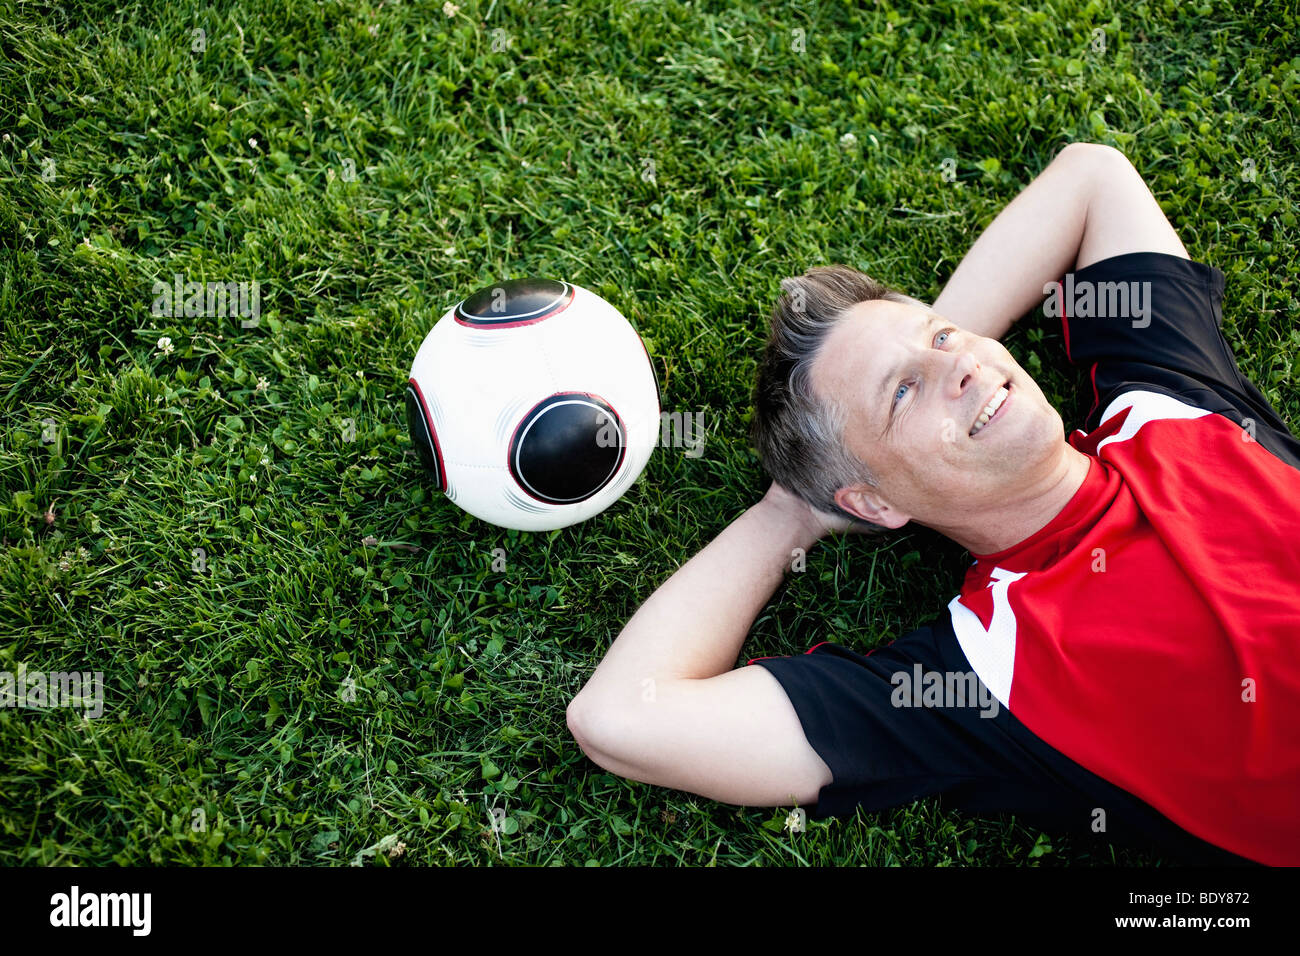 Soccer Player Relaxing On Grass Stock Photo